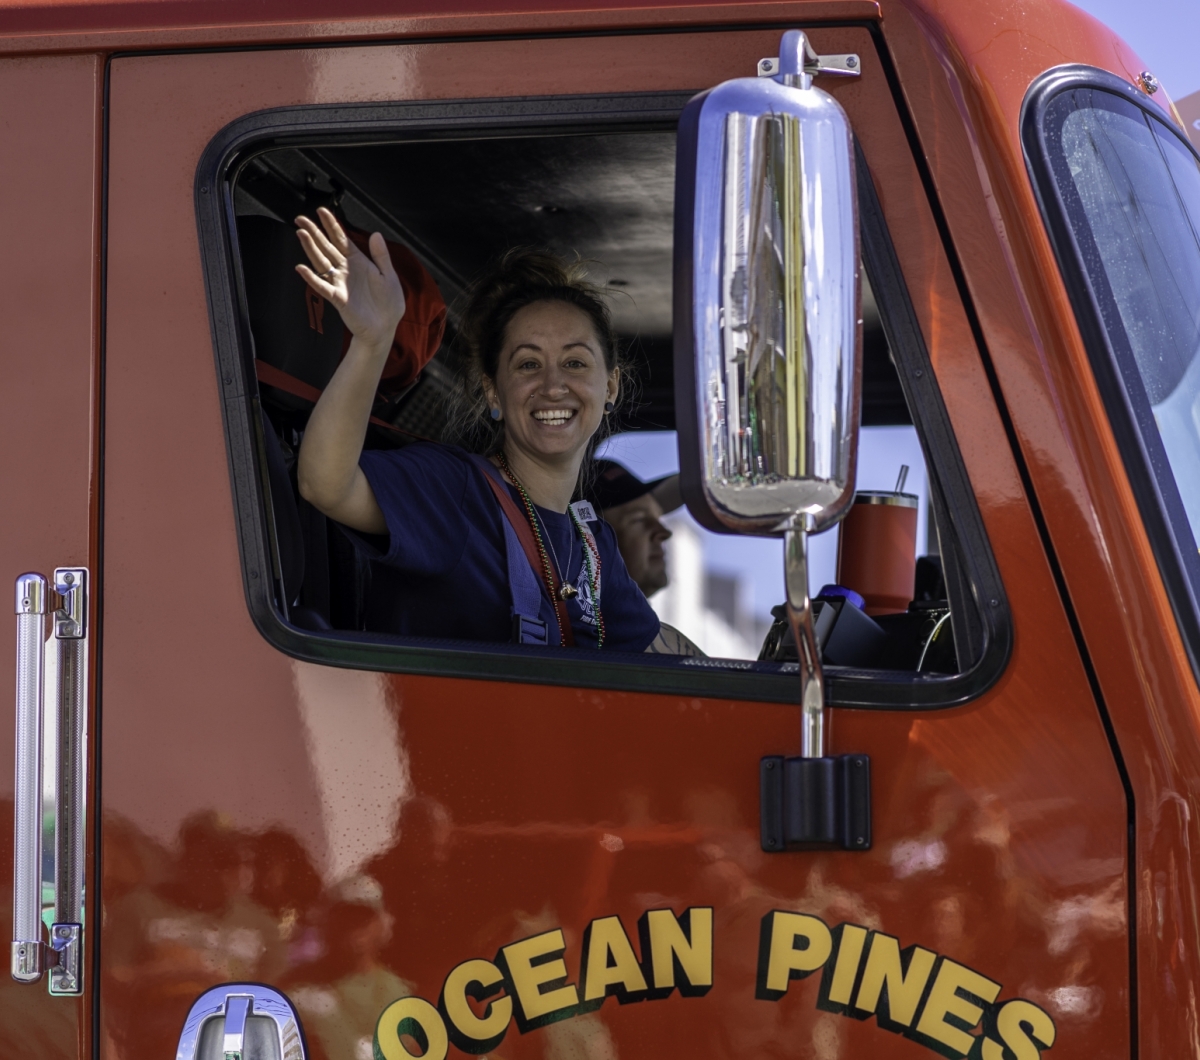 Ocean Pines Firefighter waving out the truck window